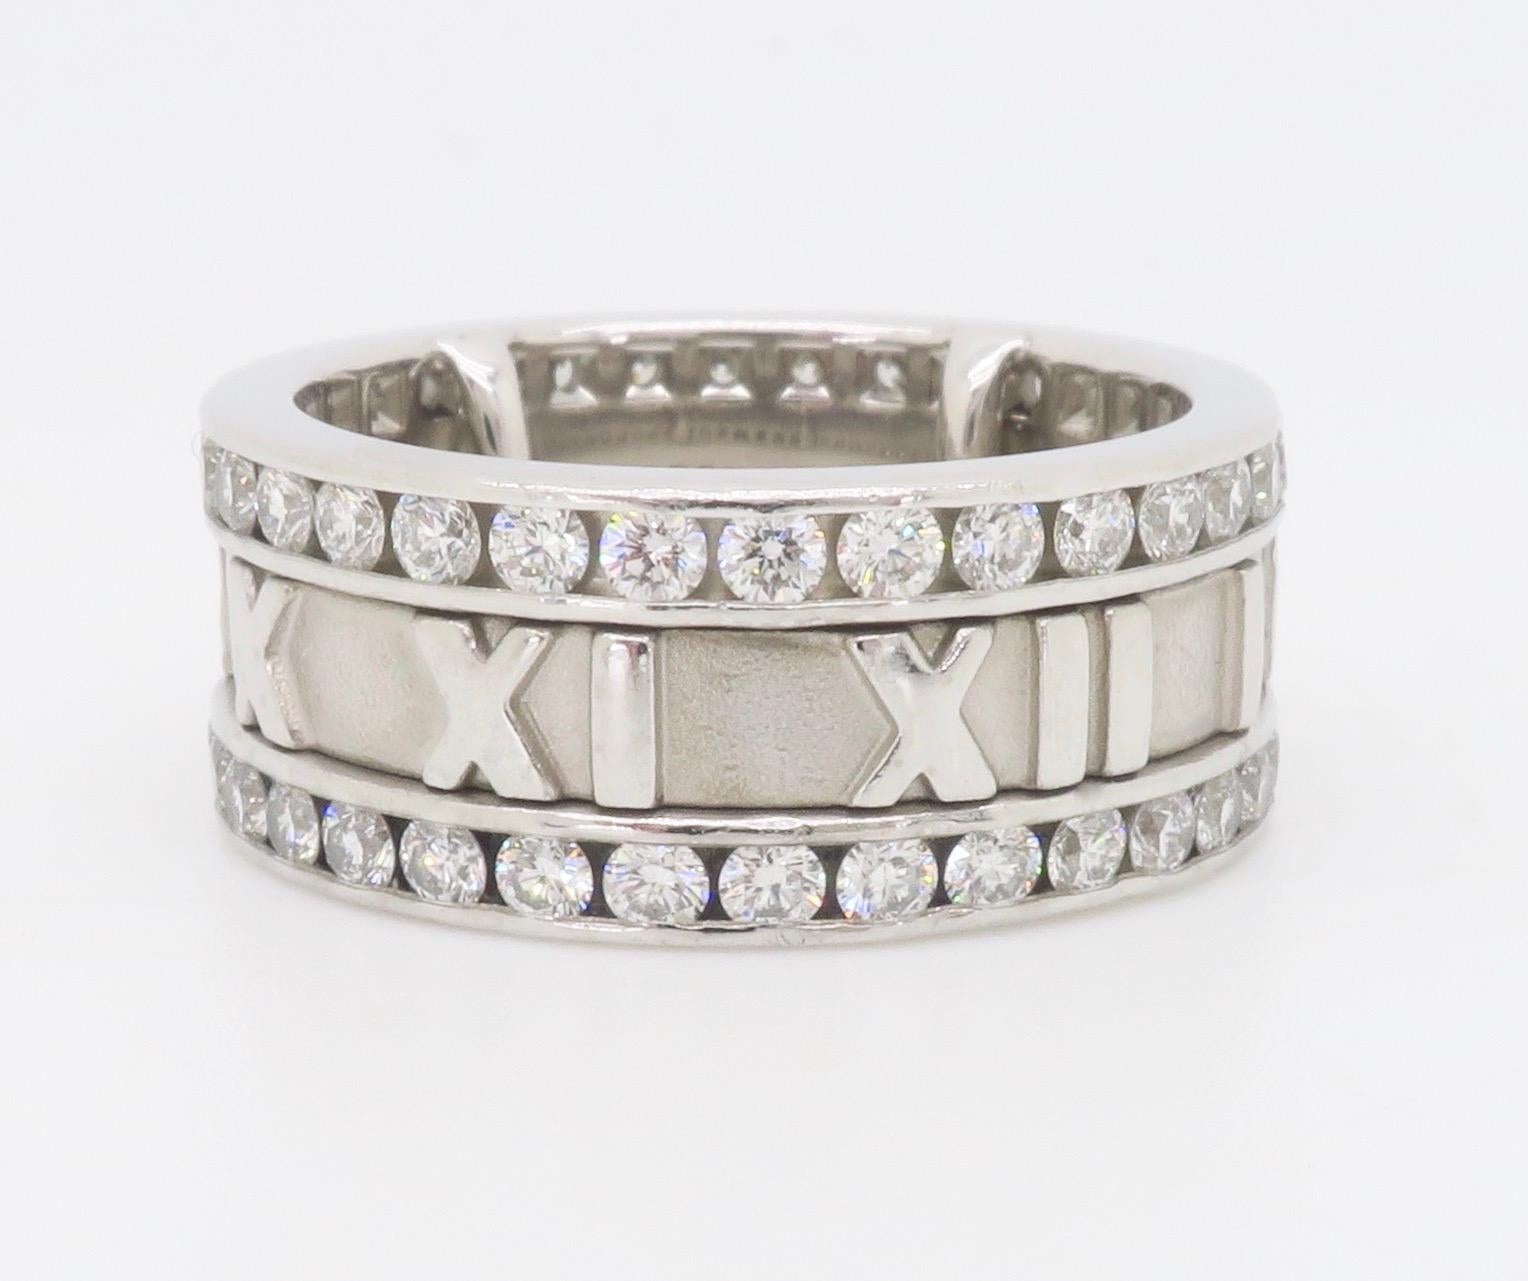 Iconic Tiffany & Co. Atlas diamond eternity band made in 18k White Gold with comfort fit bars that were added by Tiffany & Co. in excellent condition. 

Diamond Carat Weight: 1.92CTW
Diamond Cut: Round Brilliant
Color: Average E-F
Clarity: Average